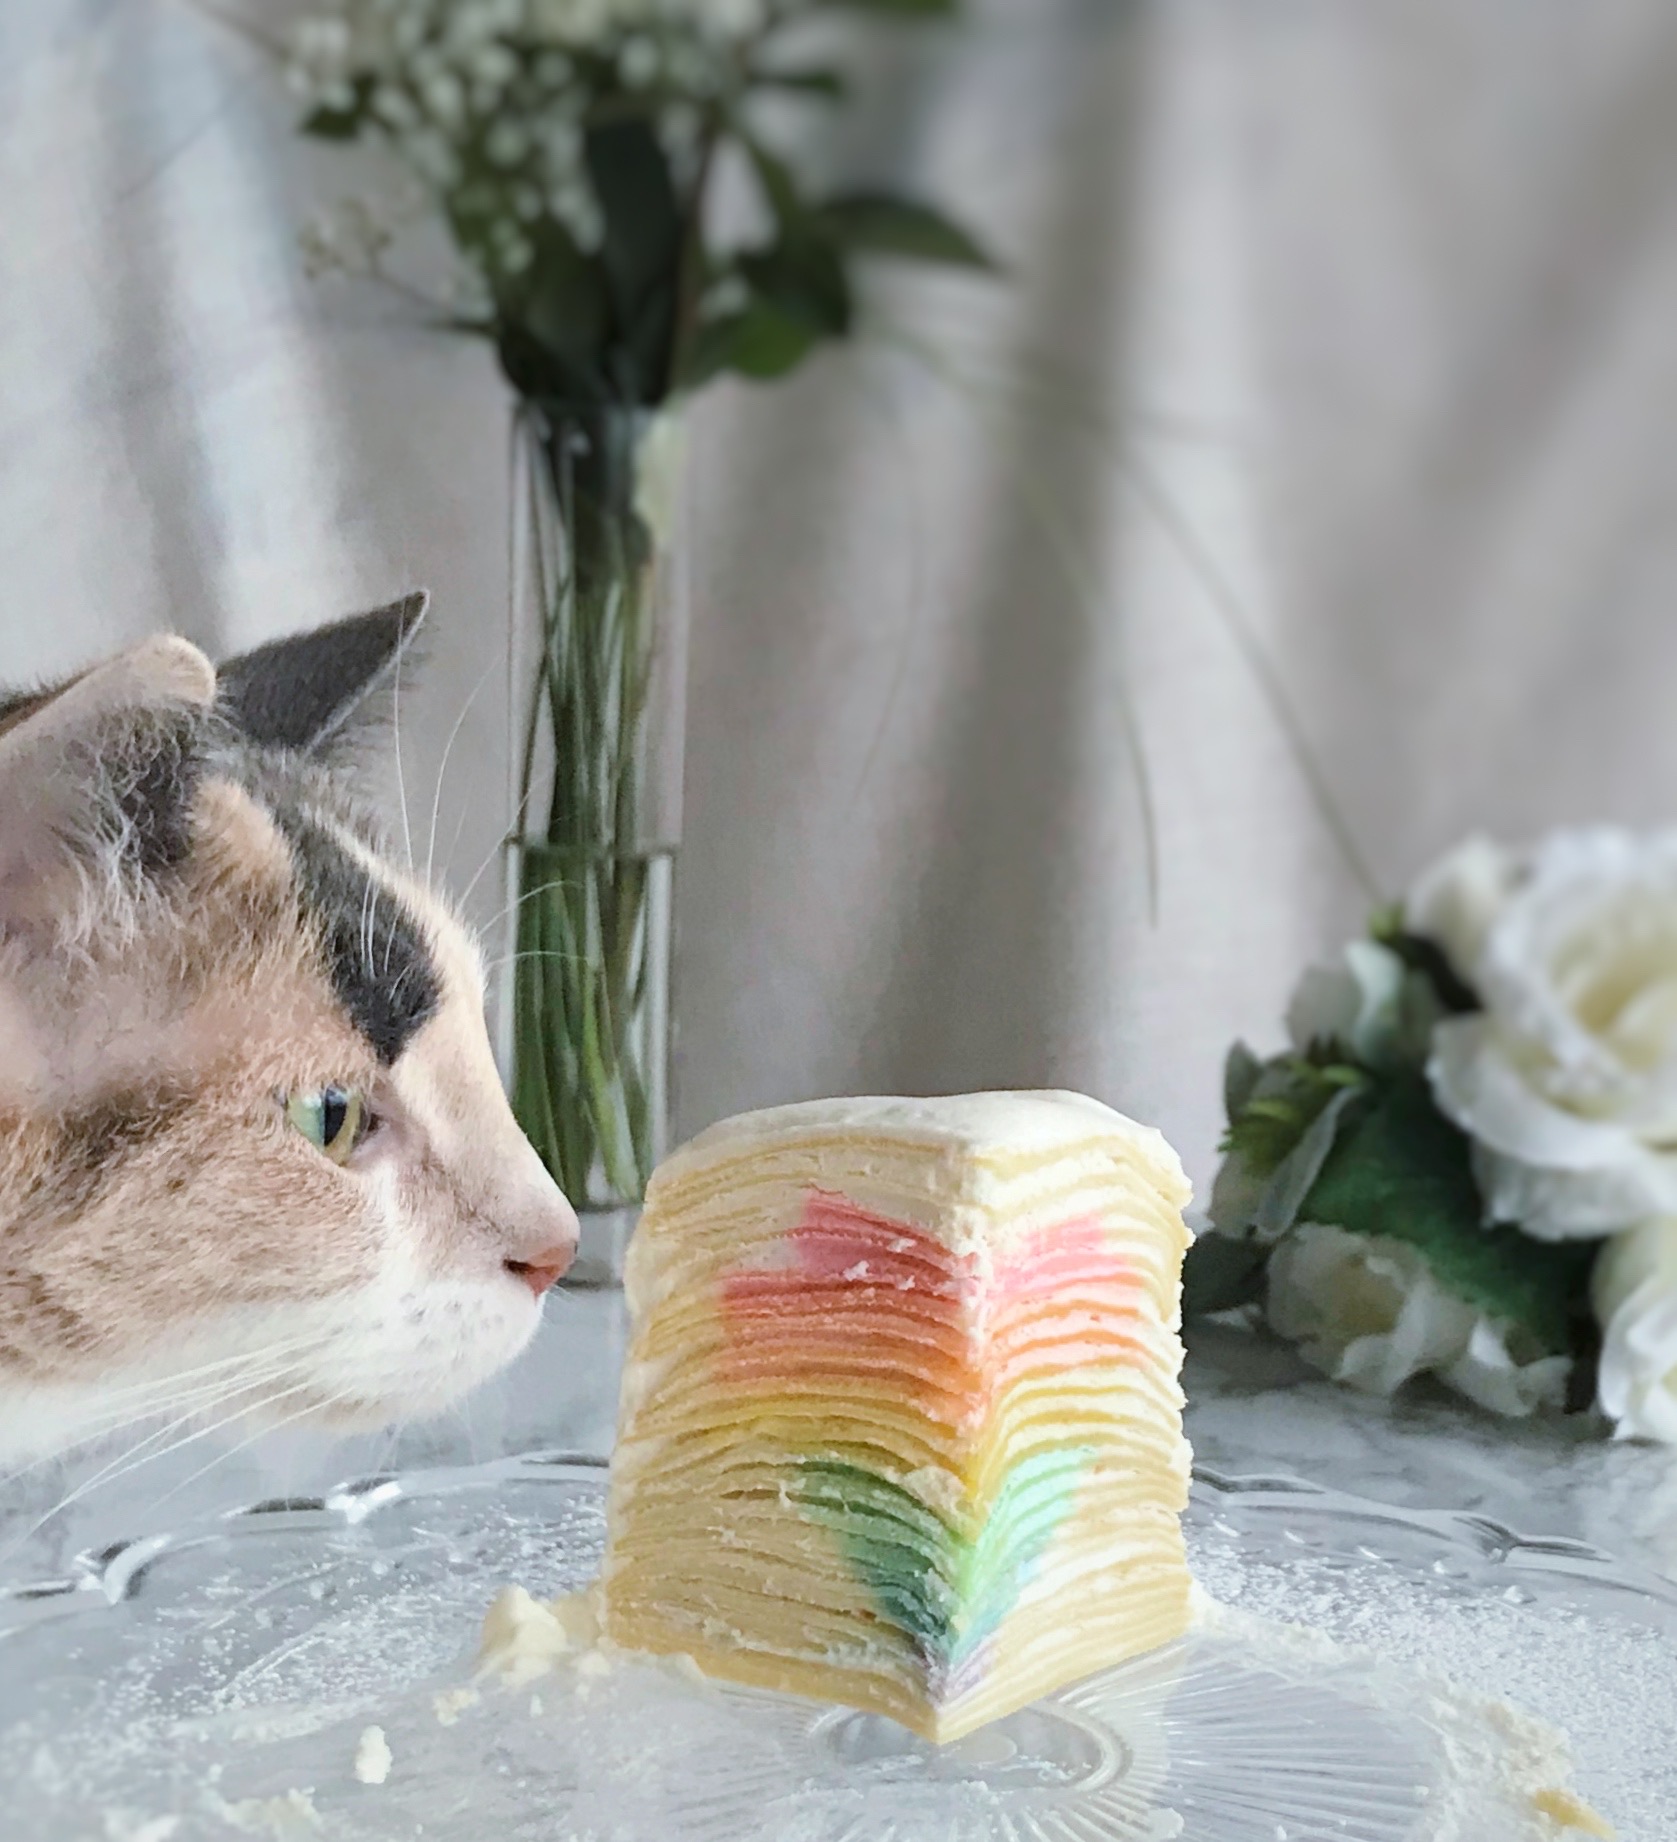 A photo of our cat Spice smelling a cake